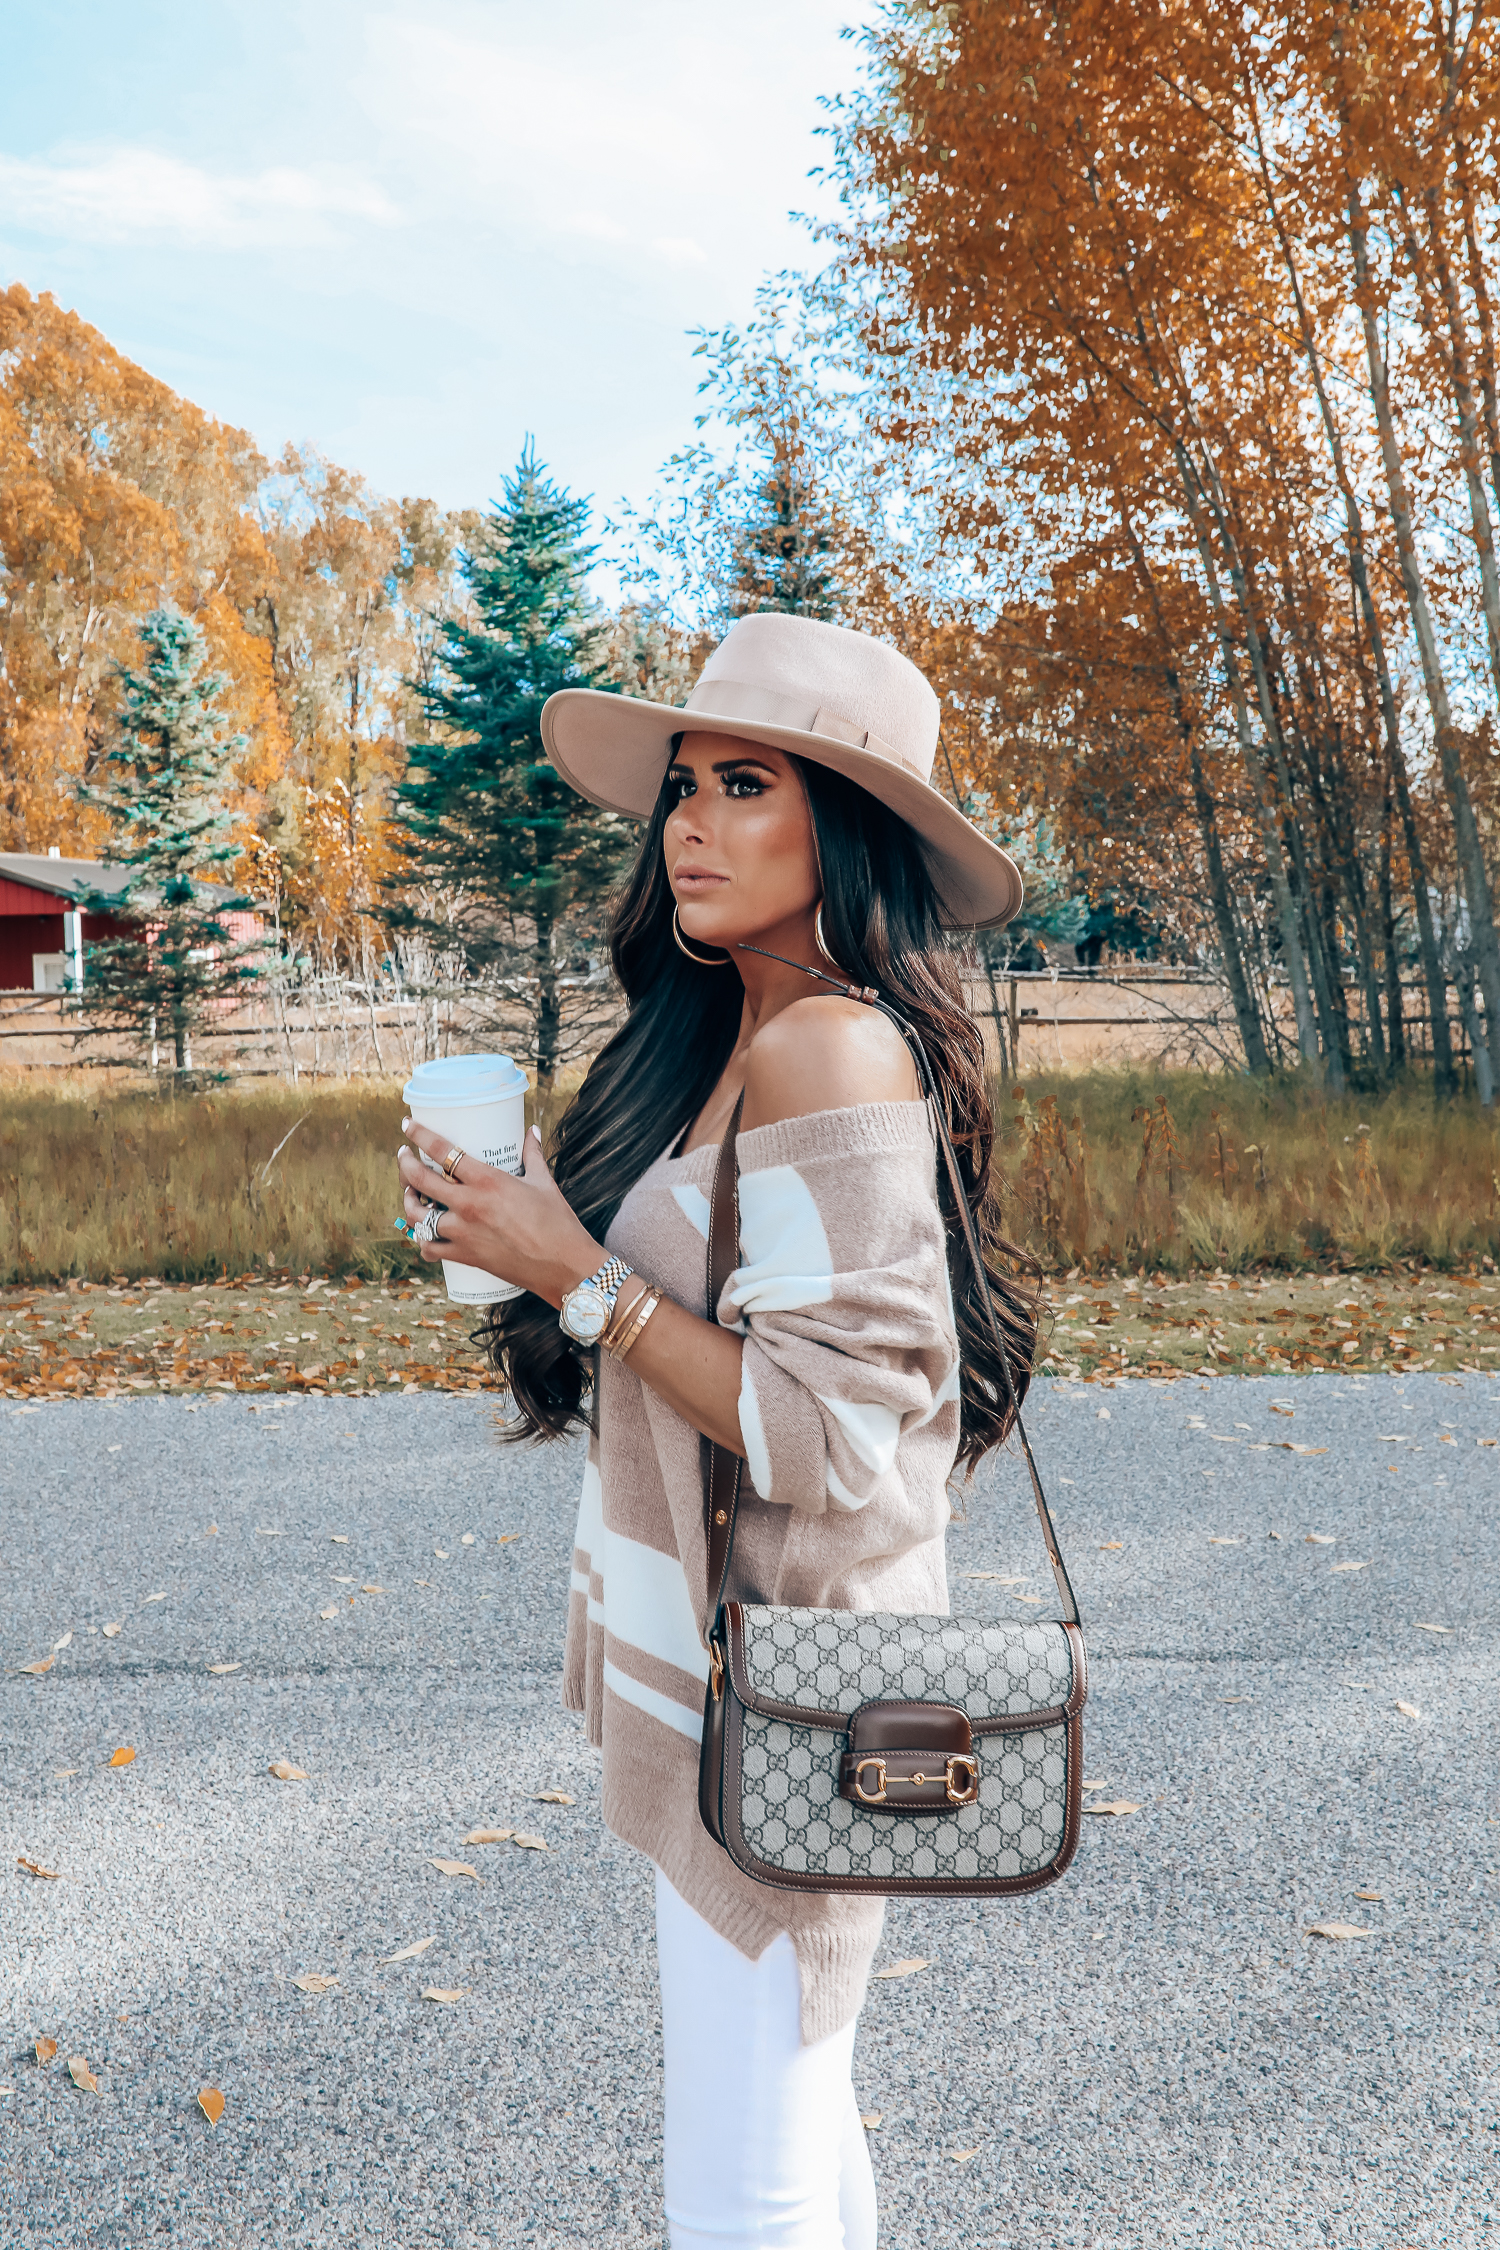 Rag and Bone White Jeans style for Fall by top US fashion blog, The Sweetest Thing: image of a woman wearing Rag and Bone white denim jeans, a Red Dress Boutique off the shoulder striped sweater, Gianni Bini boots, Gucci 1955 shoulder bag, Brixton Panama hat, Rolex watch, Cartier bracelets, Argento Vivo earrings, and a Free People ring | gucci 1055 horsebit bag, fall fashion 2019 pinterest, emily ann gemma